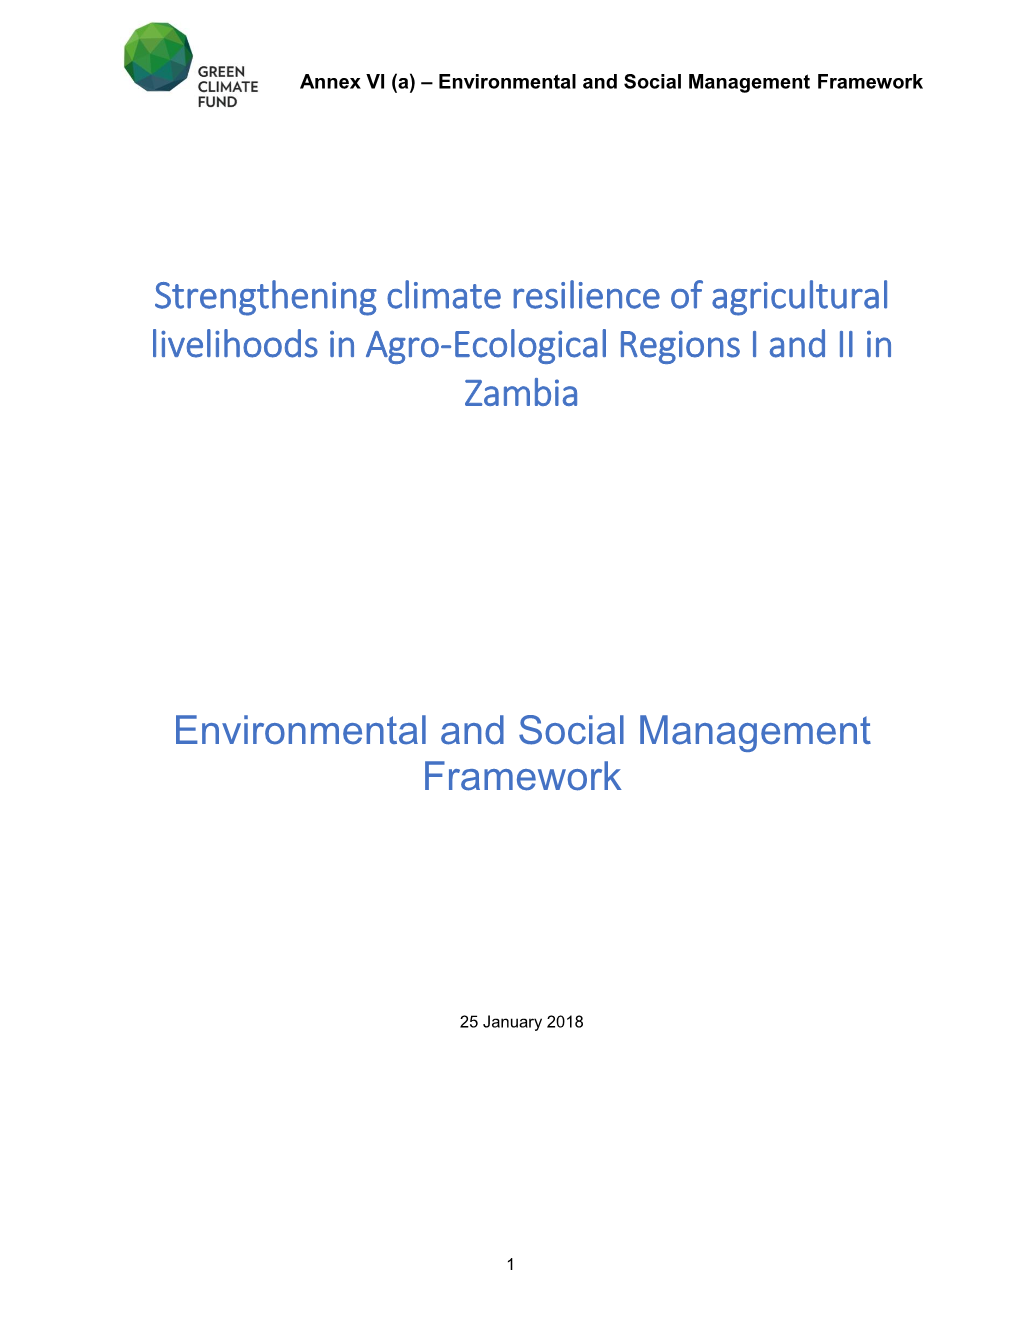 Strengthening Climate Resilience of Agricultural Livelihoods in Agro-Ecological Regions I and II in Zambia